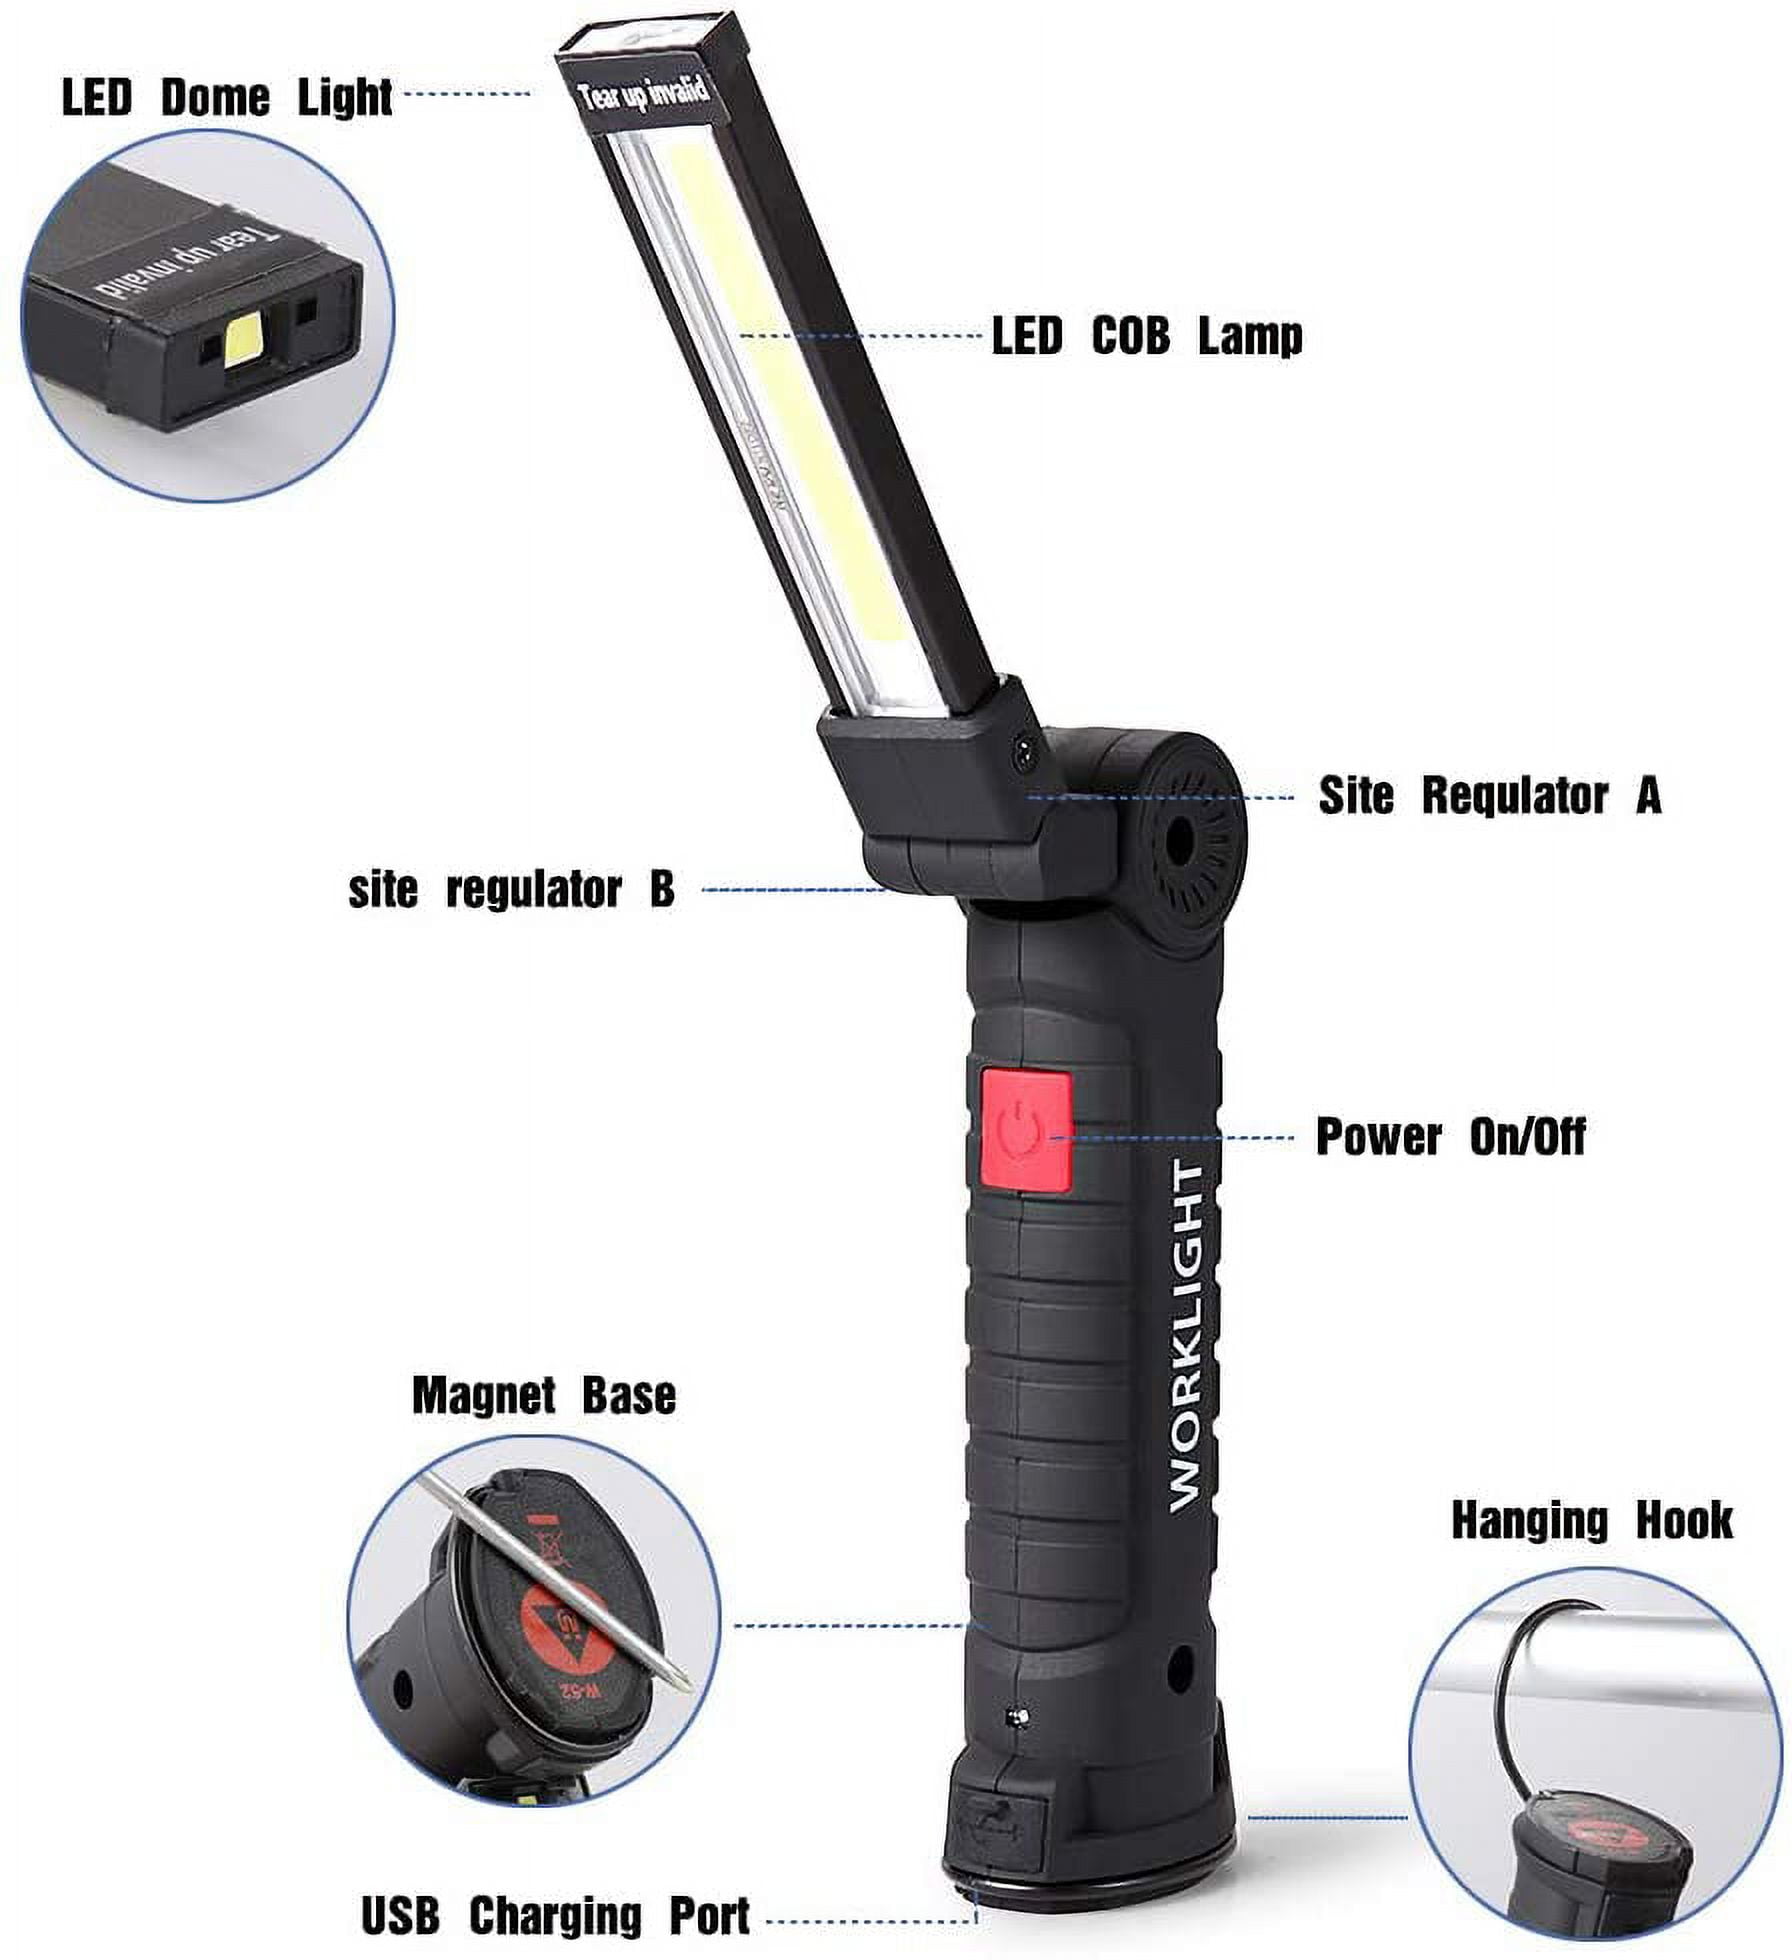 Bell and Howell Bionic Portable LED Worklight 750 Lumens Rechargeable Work Light